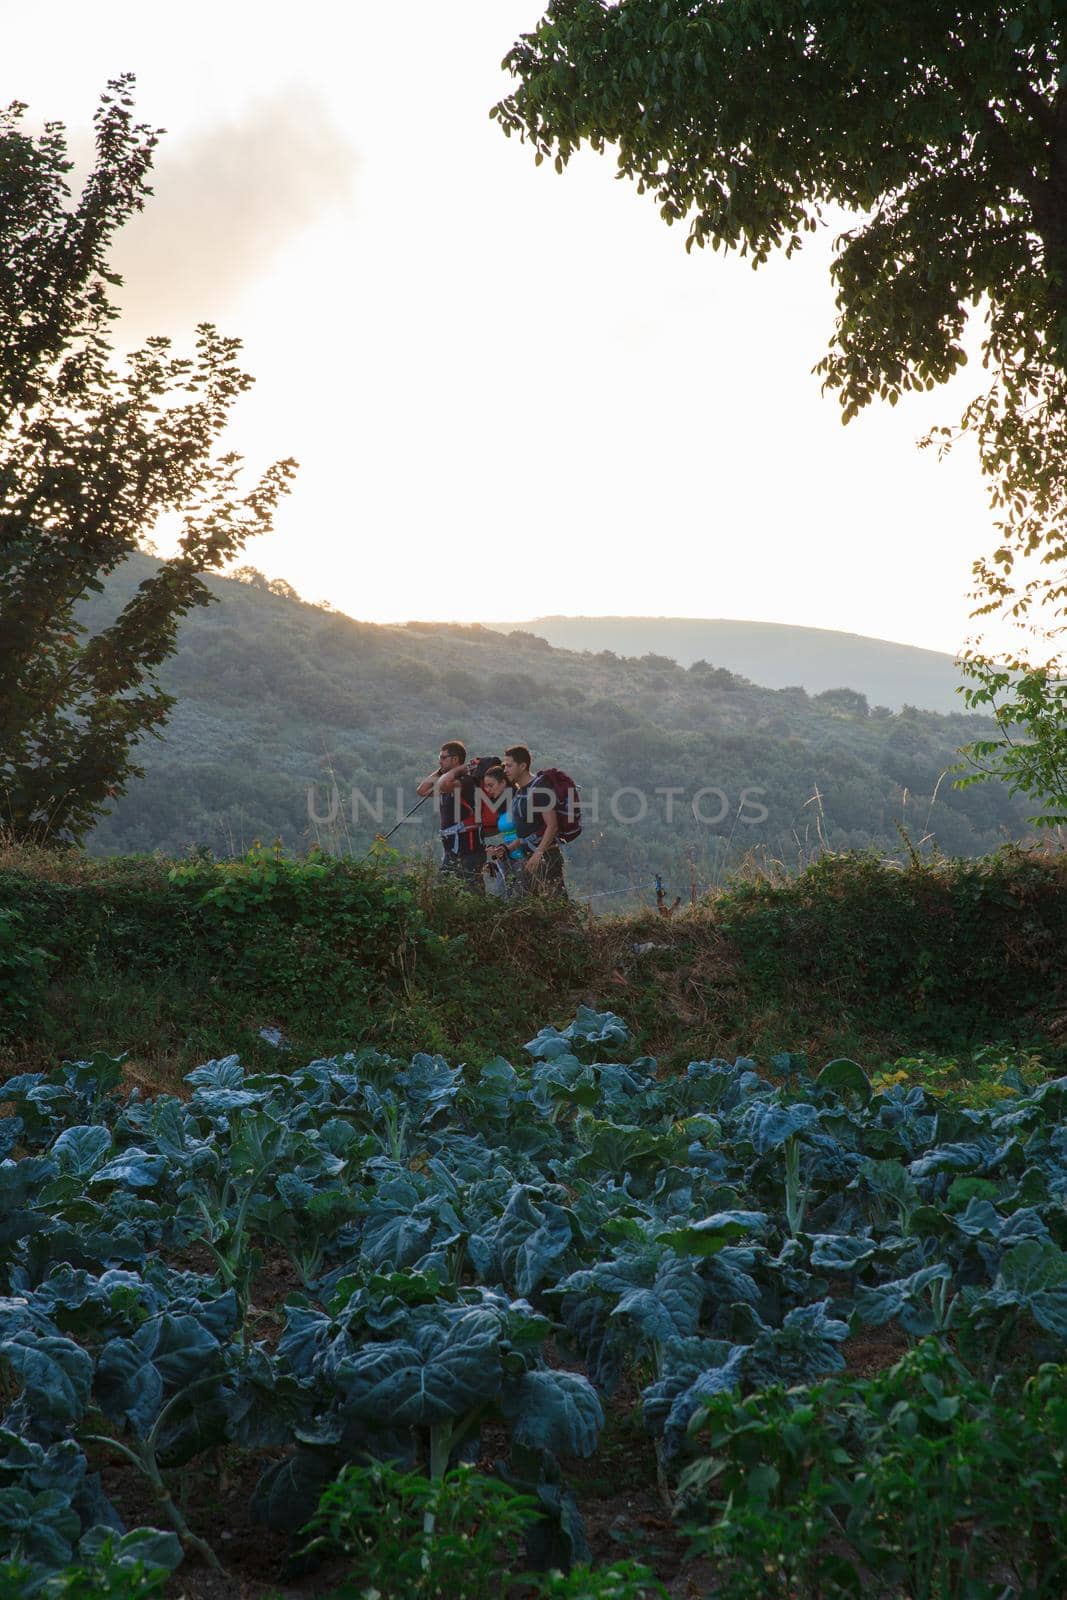 LA FABA, SPAIN - AUGUST, 09: Pilgrims next to the cultivated garden on August 09, 2016